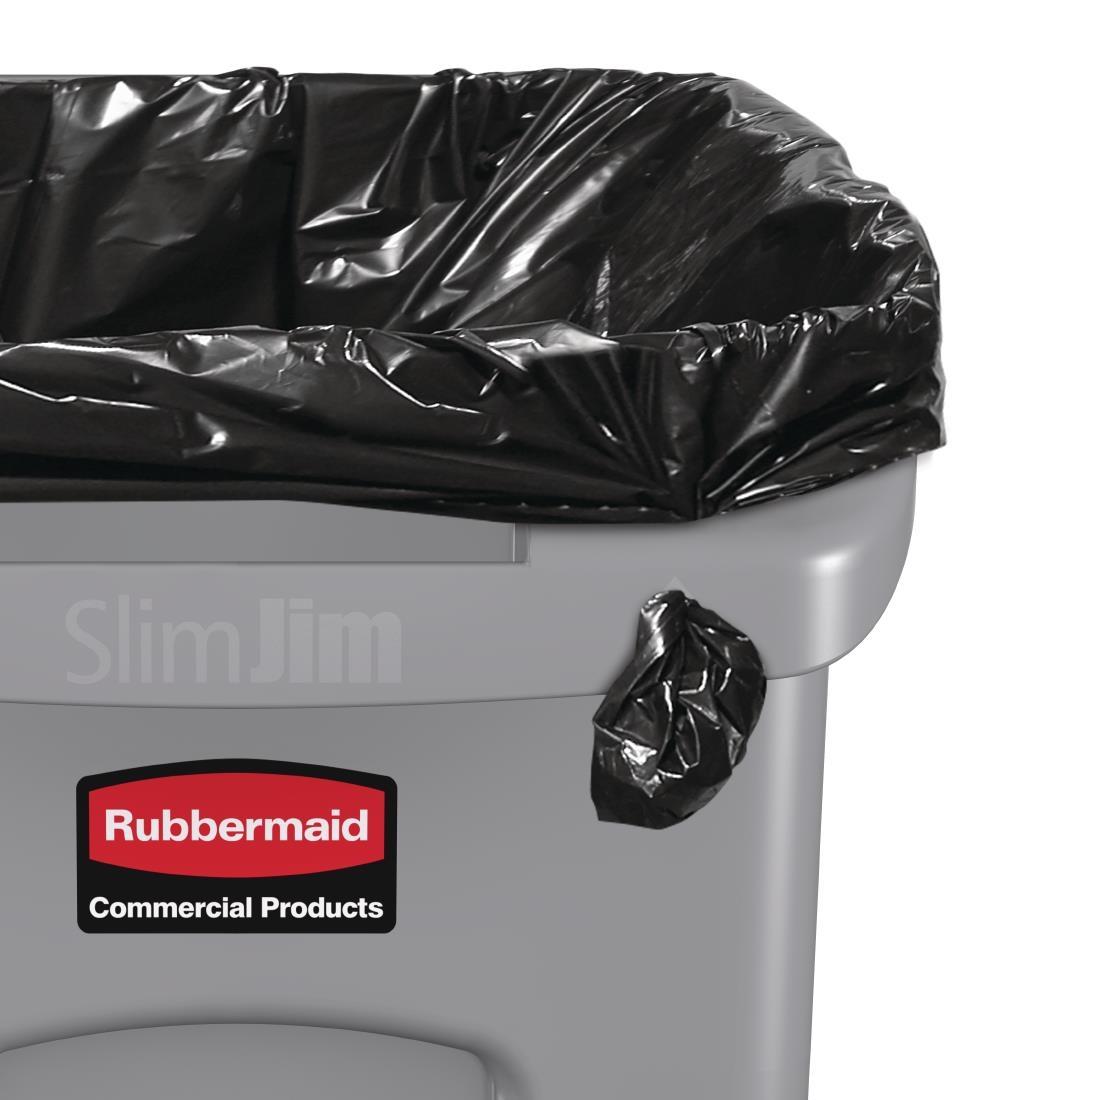 Rubbermaid Slim Jim Container With Venting Channels Grey 60Ltr - F603  - 4